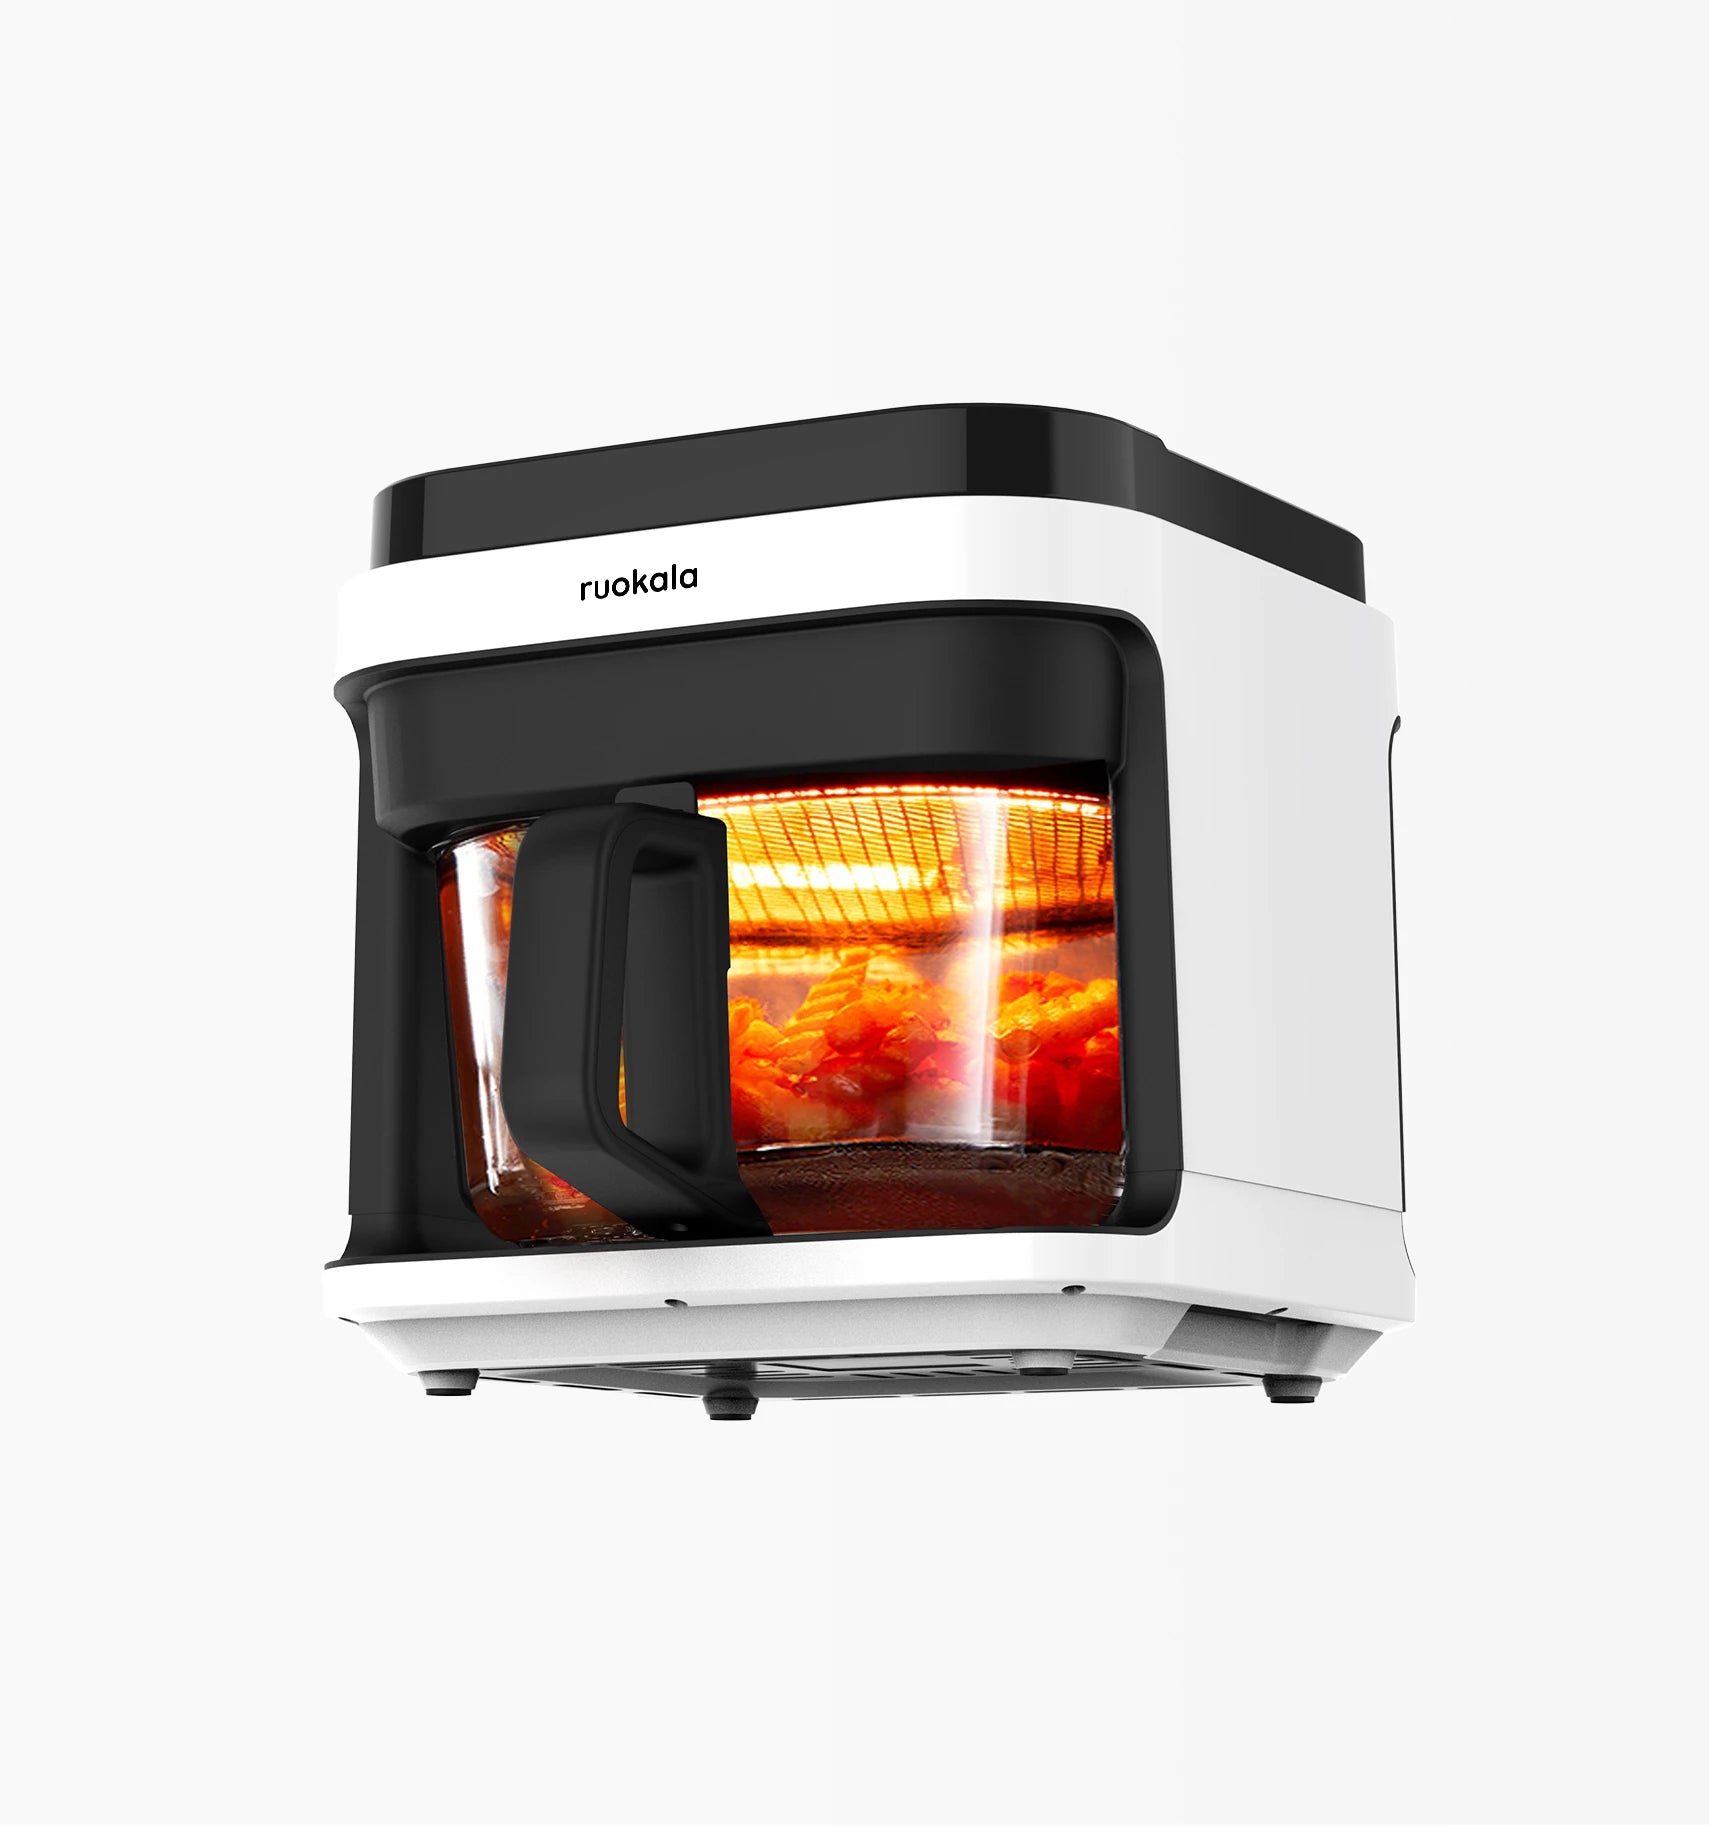 Ruokala air fryer in operation with a warm reddish glow, emphasizing the heat technology for efficient cooking.